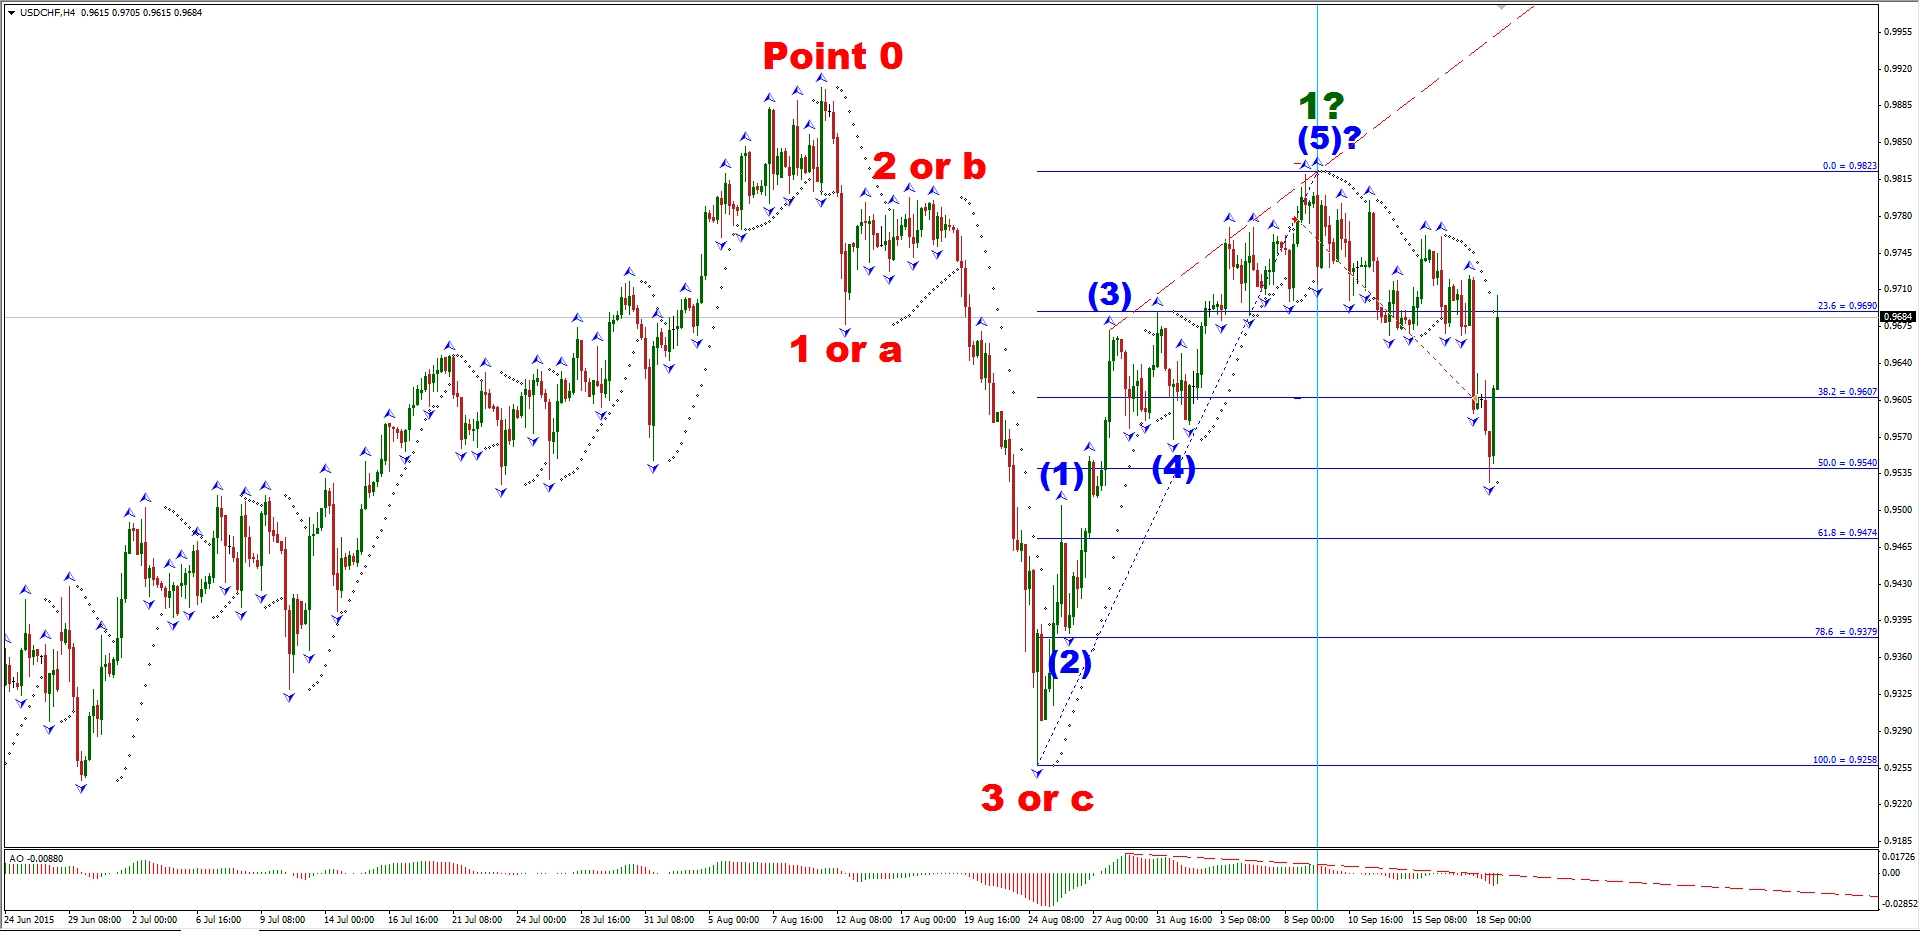 Trading Journal #8: Sell USDCHF - Profit 558